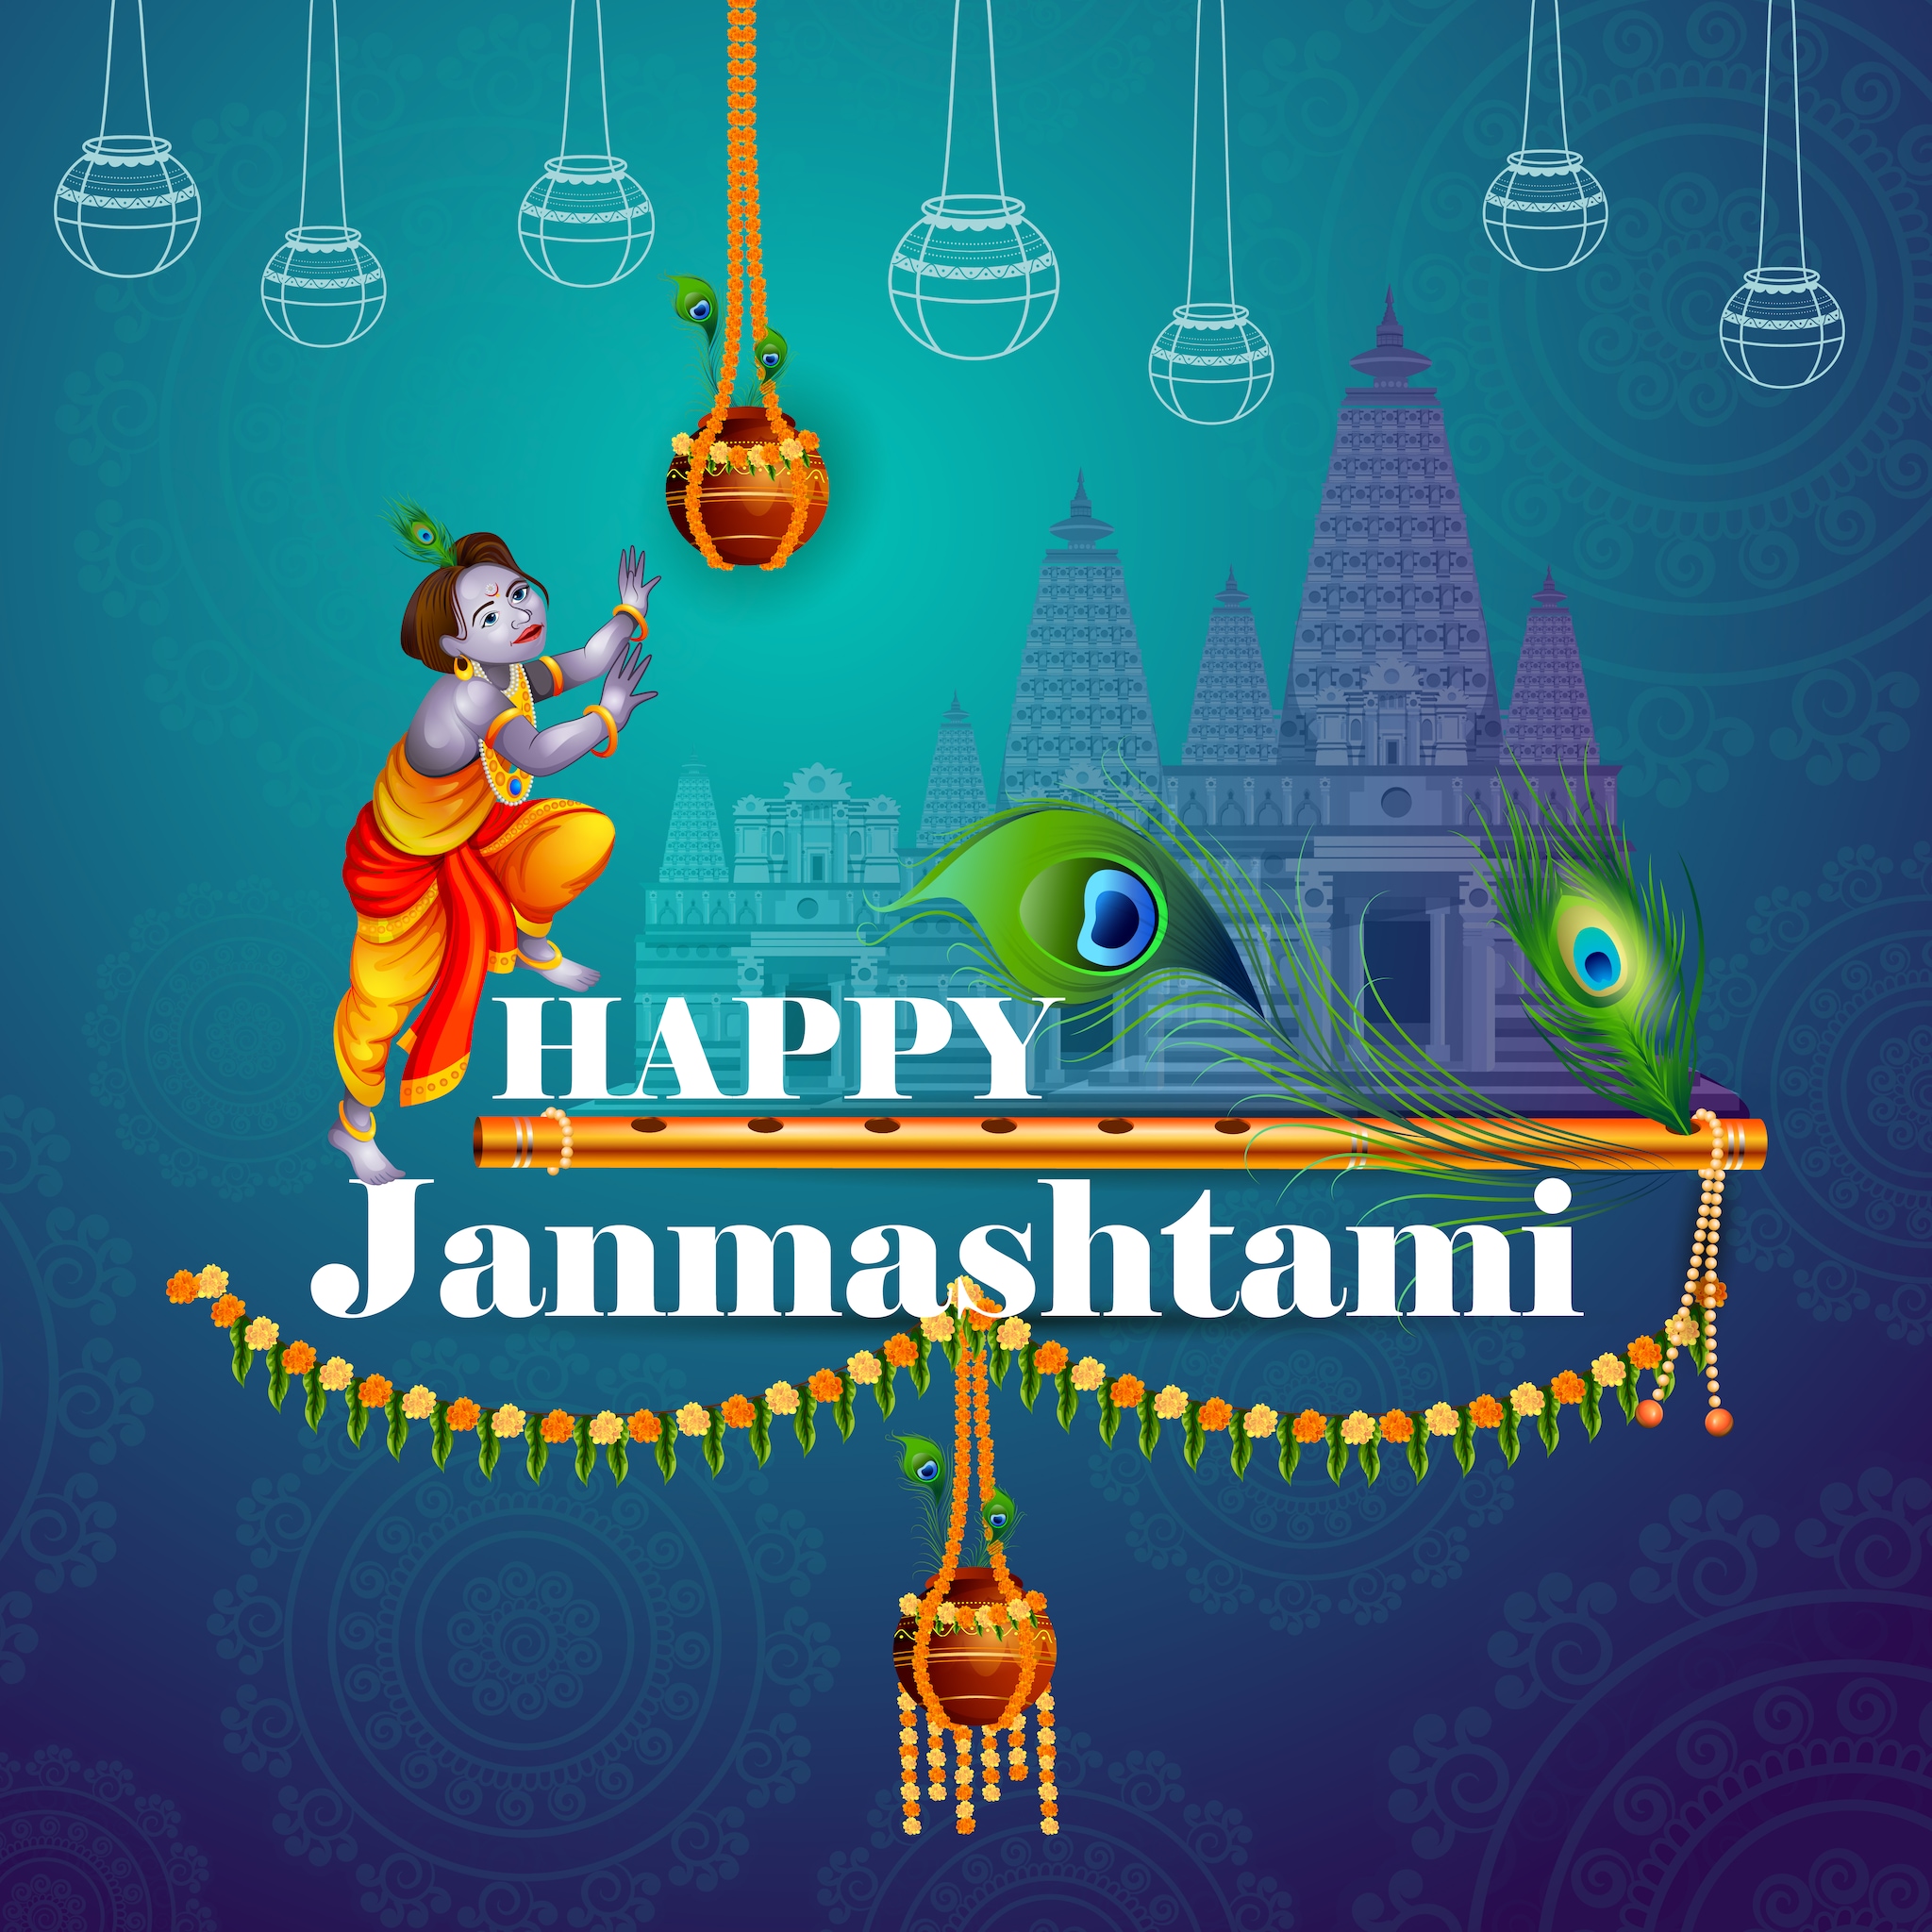 Happy Dahi Handi 2022 Wishes, Greetings, Whatsapp Status, Images And Quotes You Can Share With Your Dear Ones on Krishna Janmashtami. (Image: Shutterstock) 